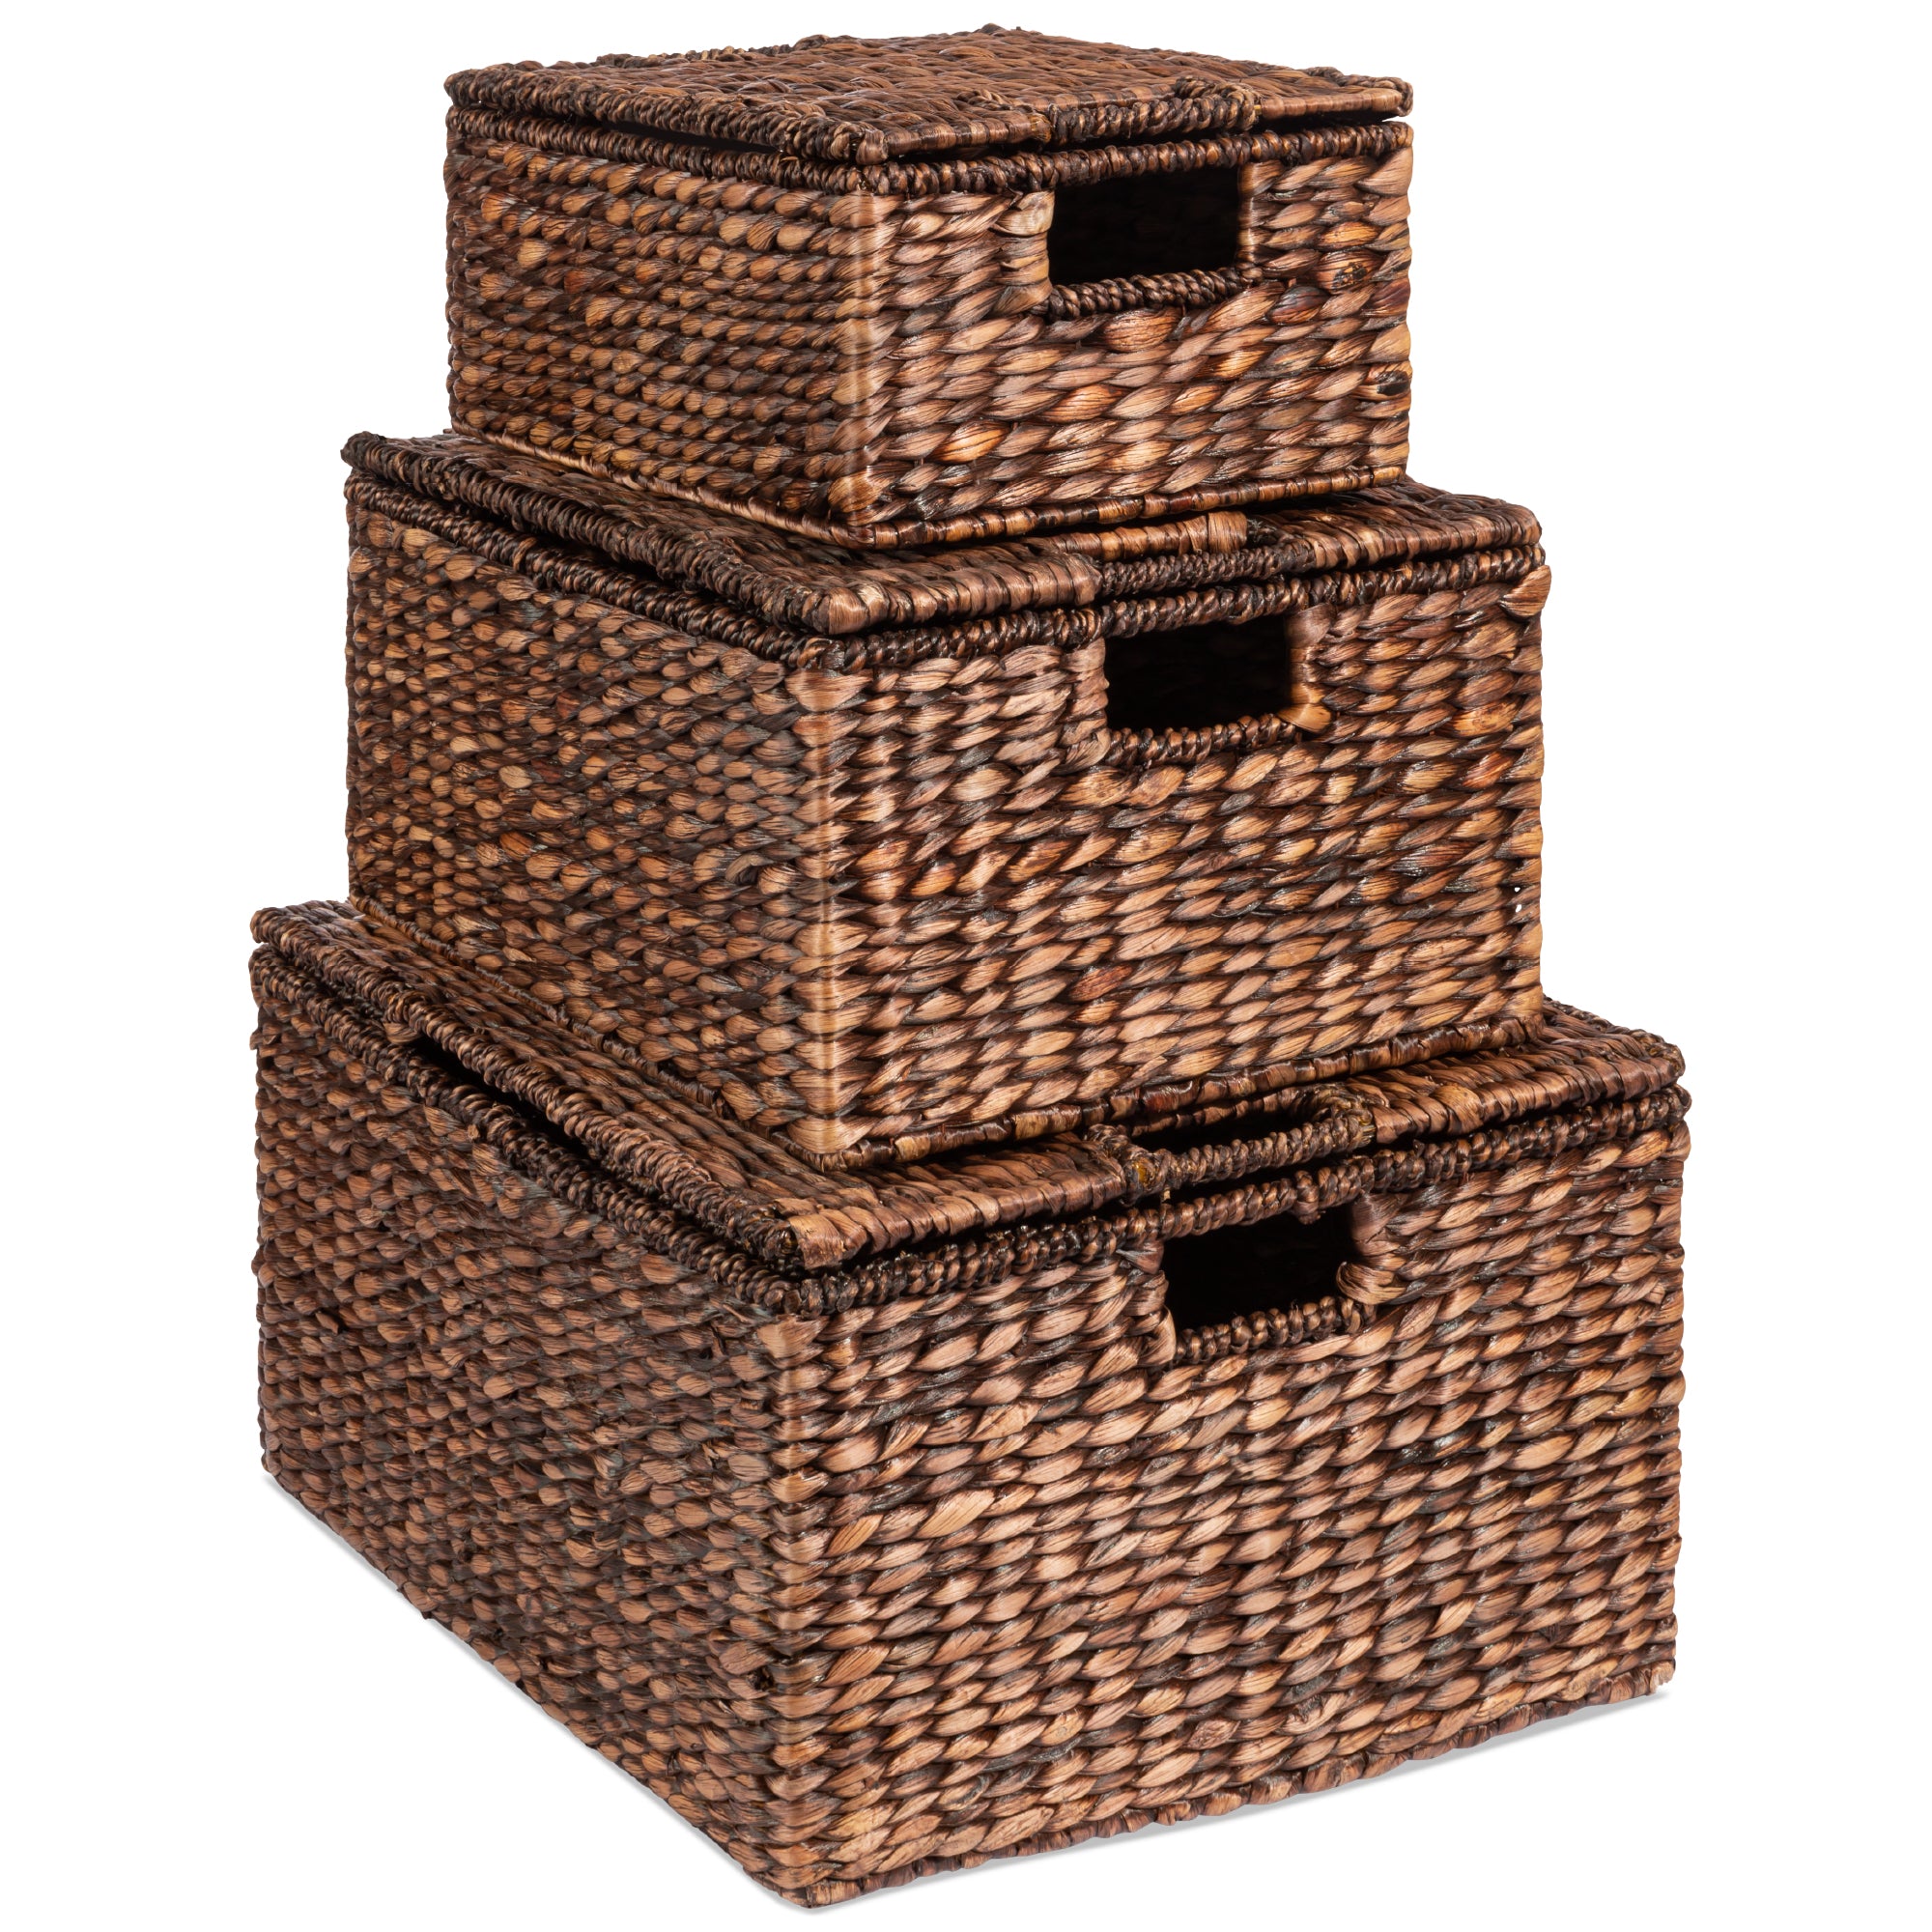 Best Choice Products 10.5x10.5in Hyacinth Storage Baskets, Set of 5  Multipurpose Collapsible Organizers - Natural